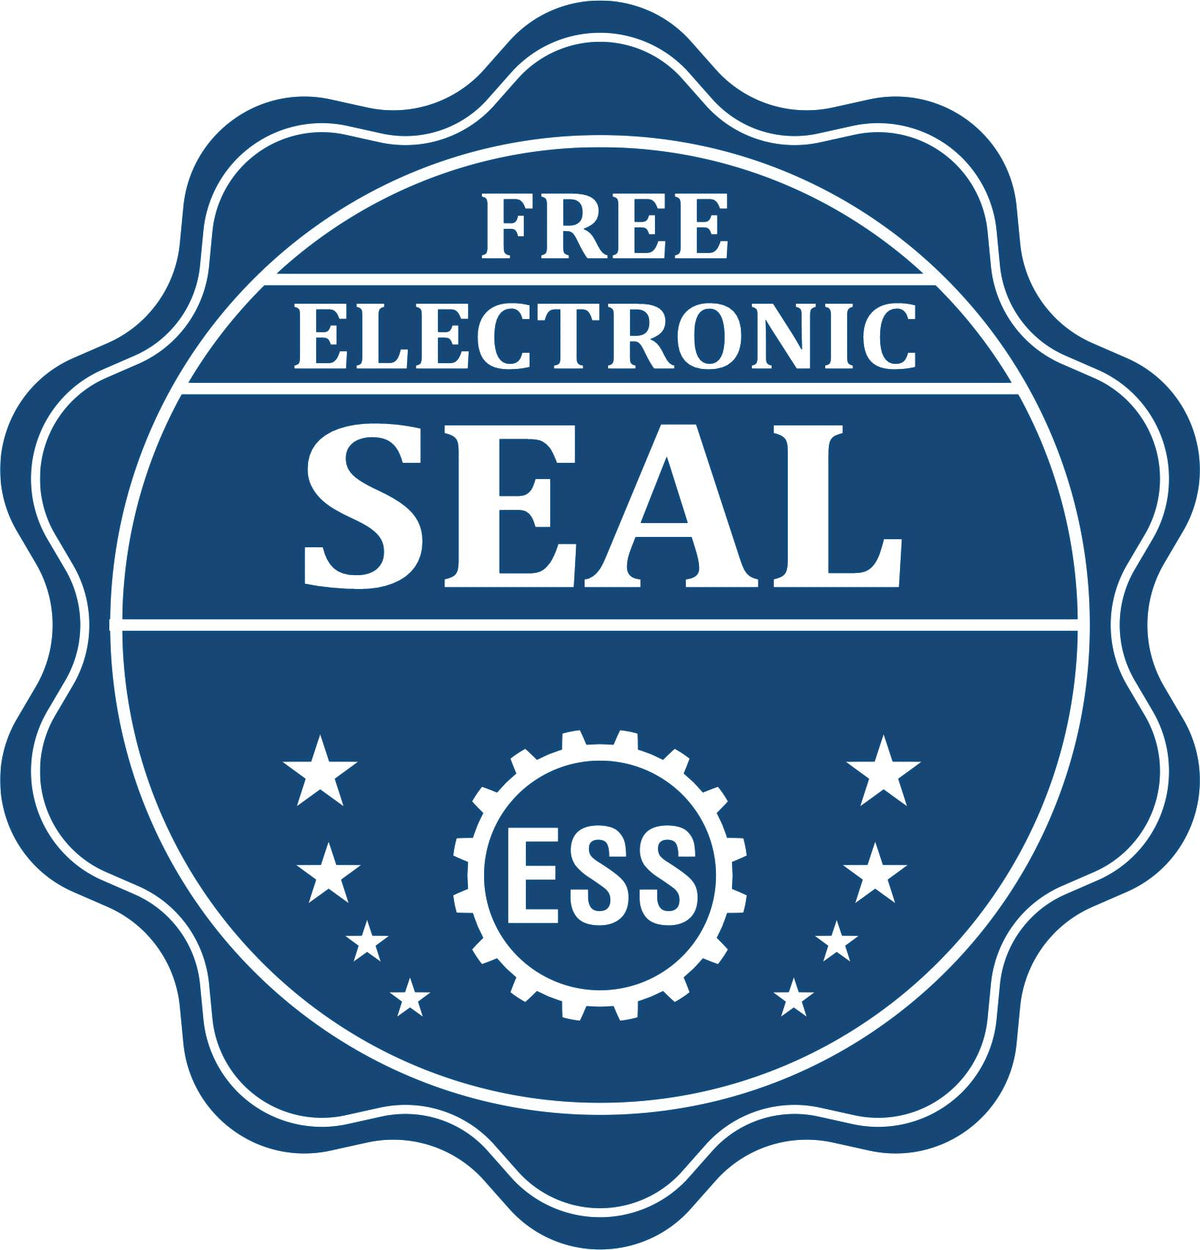 A badge showing a free electronic seal for the Heavy Duty Cast Iron Missouri Architect Embosser with stars and the ESS gear on the emblem.